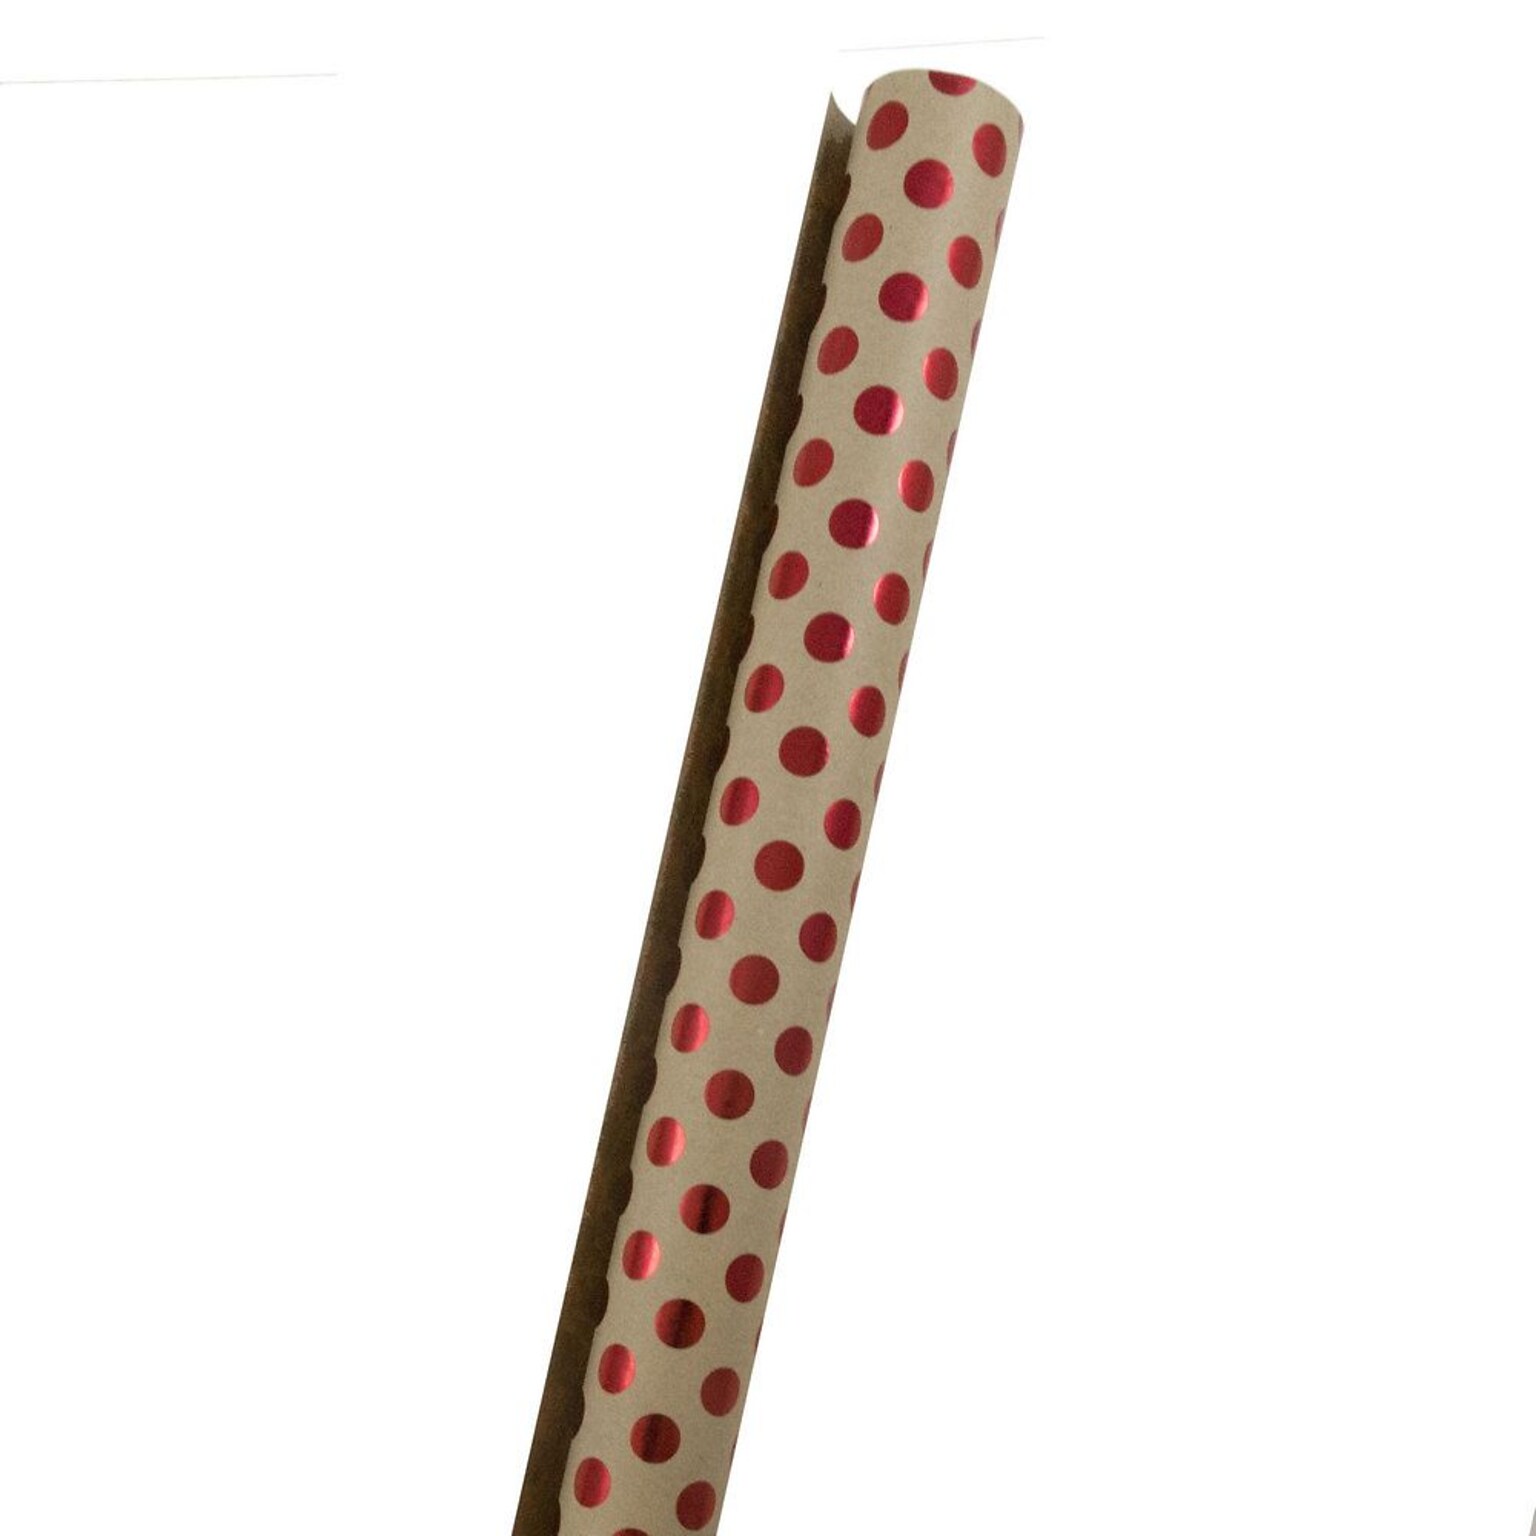 JAM Paper® Gift Wrap, Kraft Wrapping Paper, 25 Sq. Ft, Brown Kraft with Red Foil Dots, Roll Sold Individually (165KD25re)